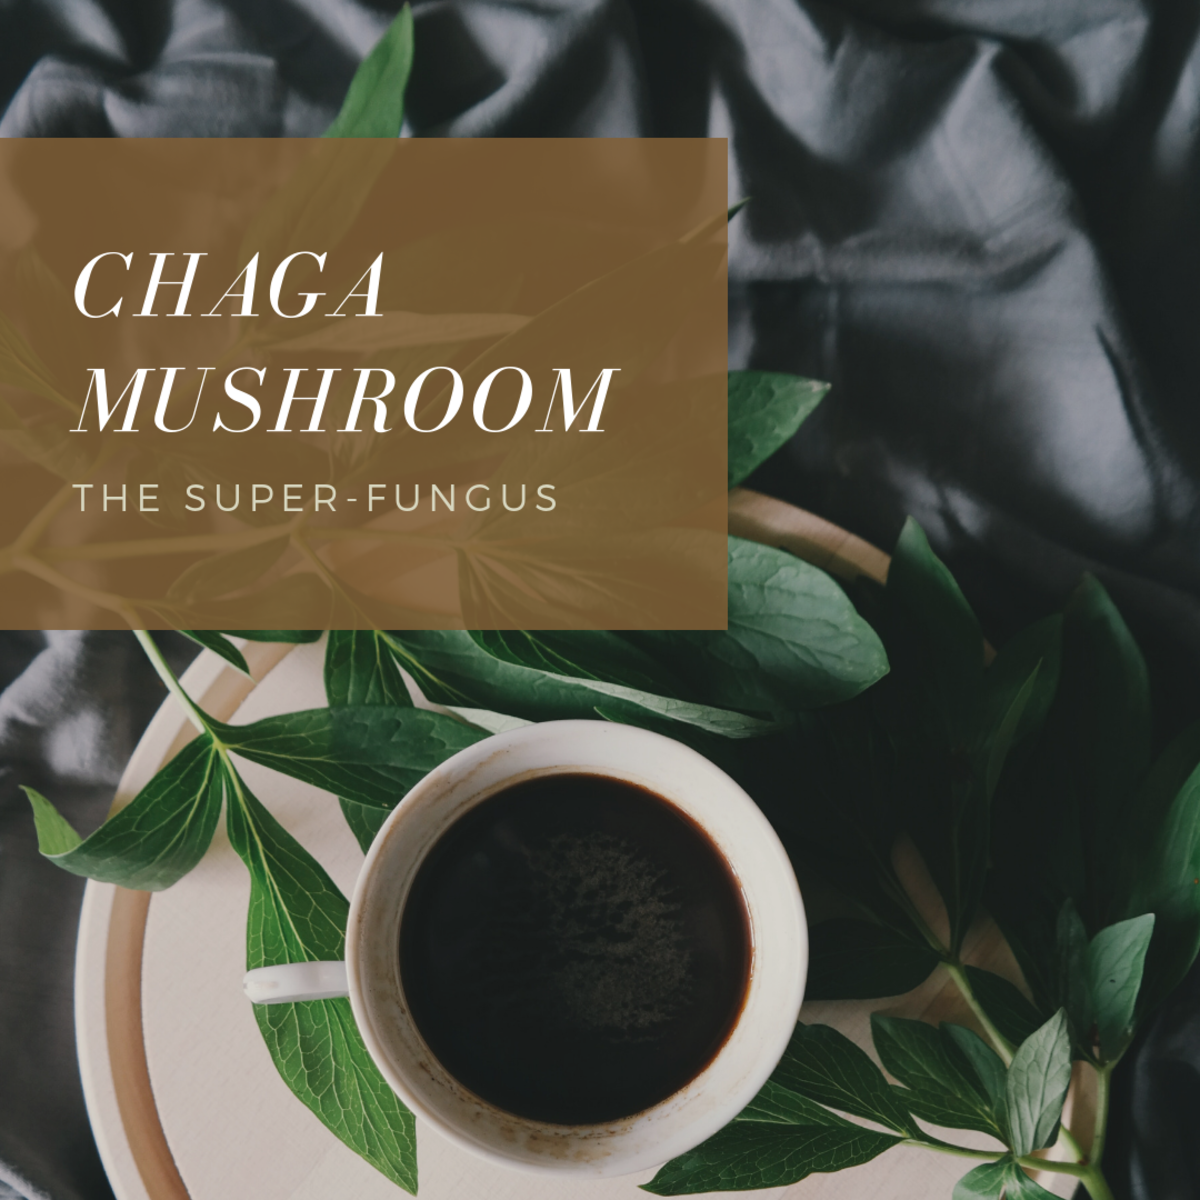 Chaga mushroom is a super-fungus and packed with tons of nutrients